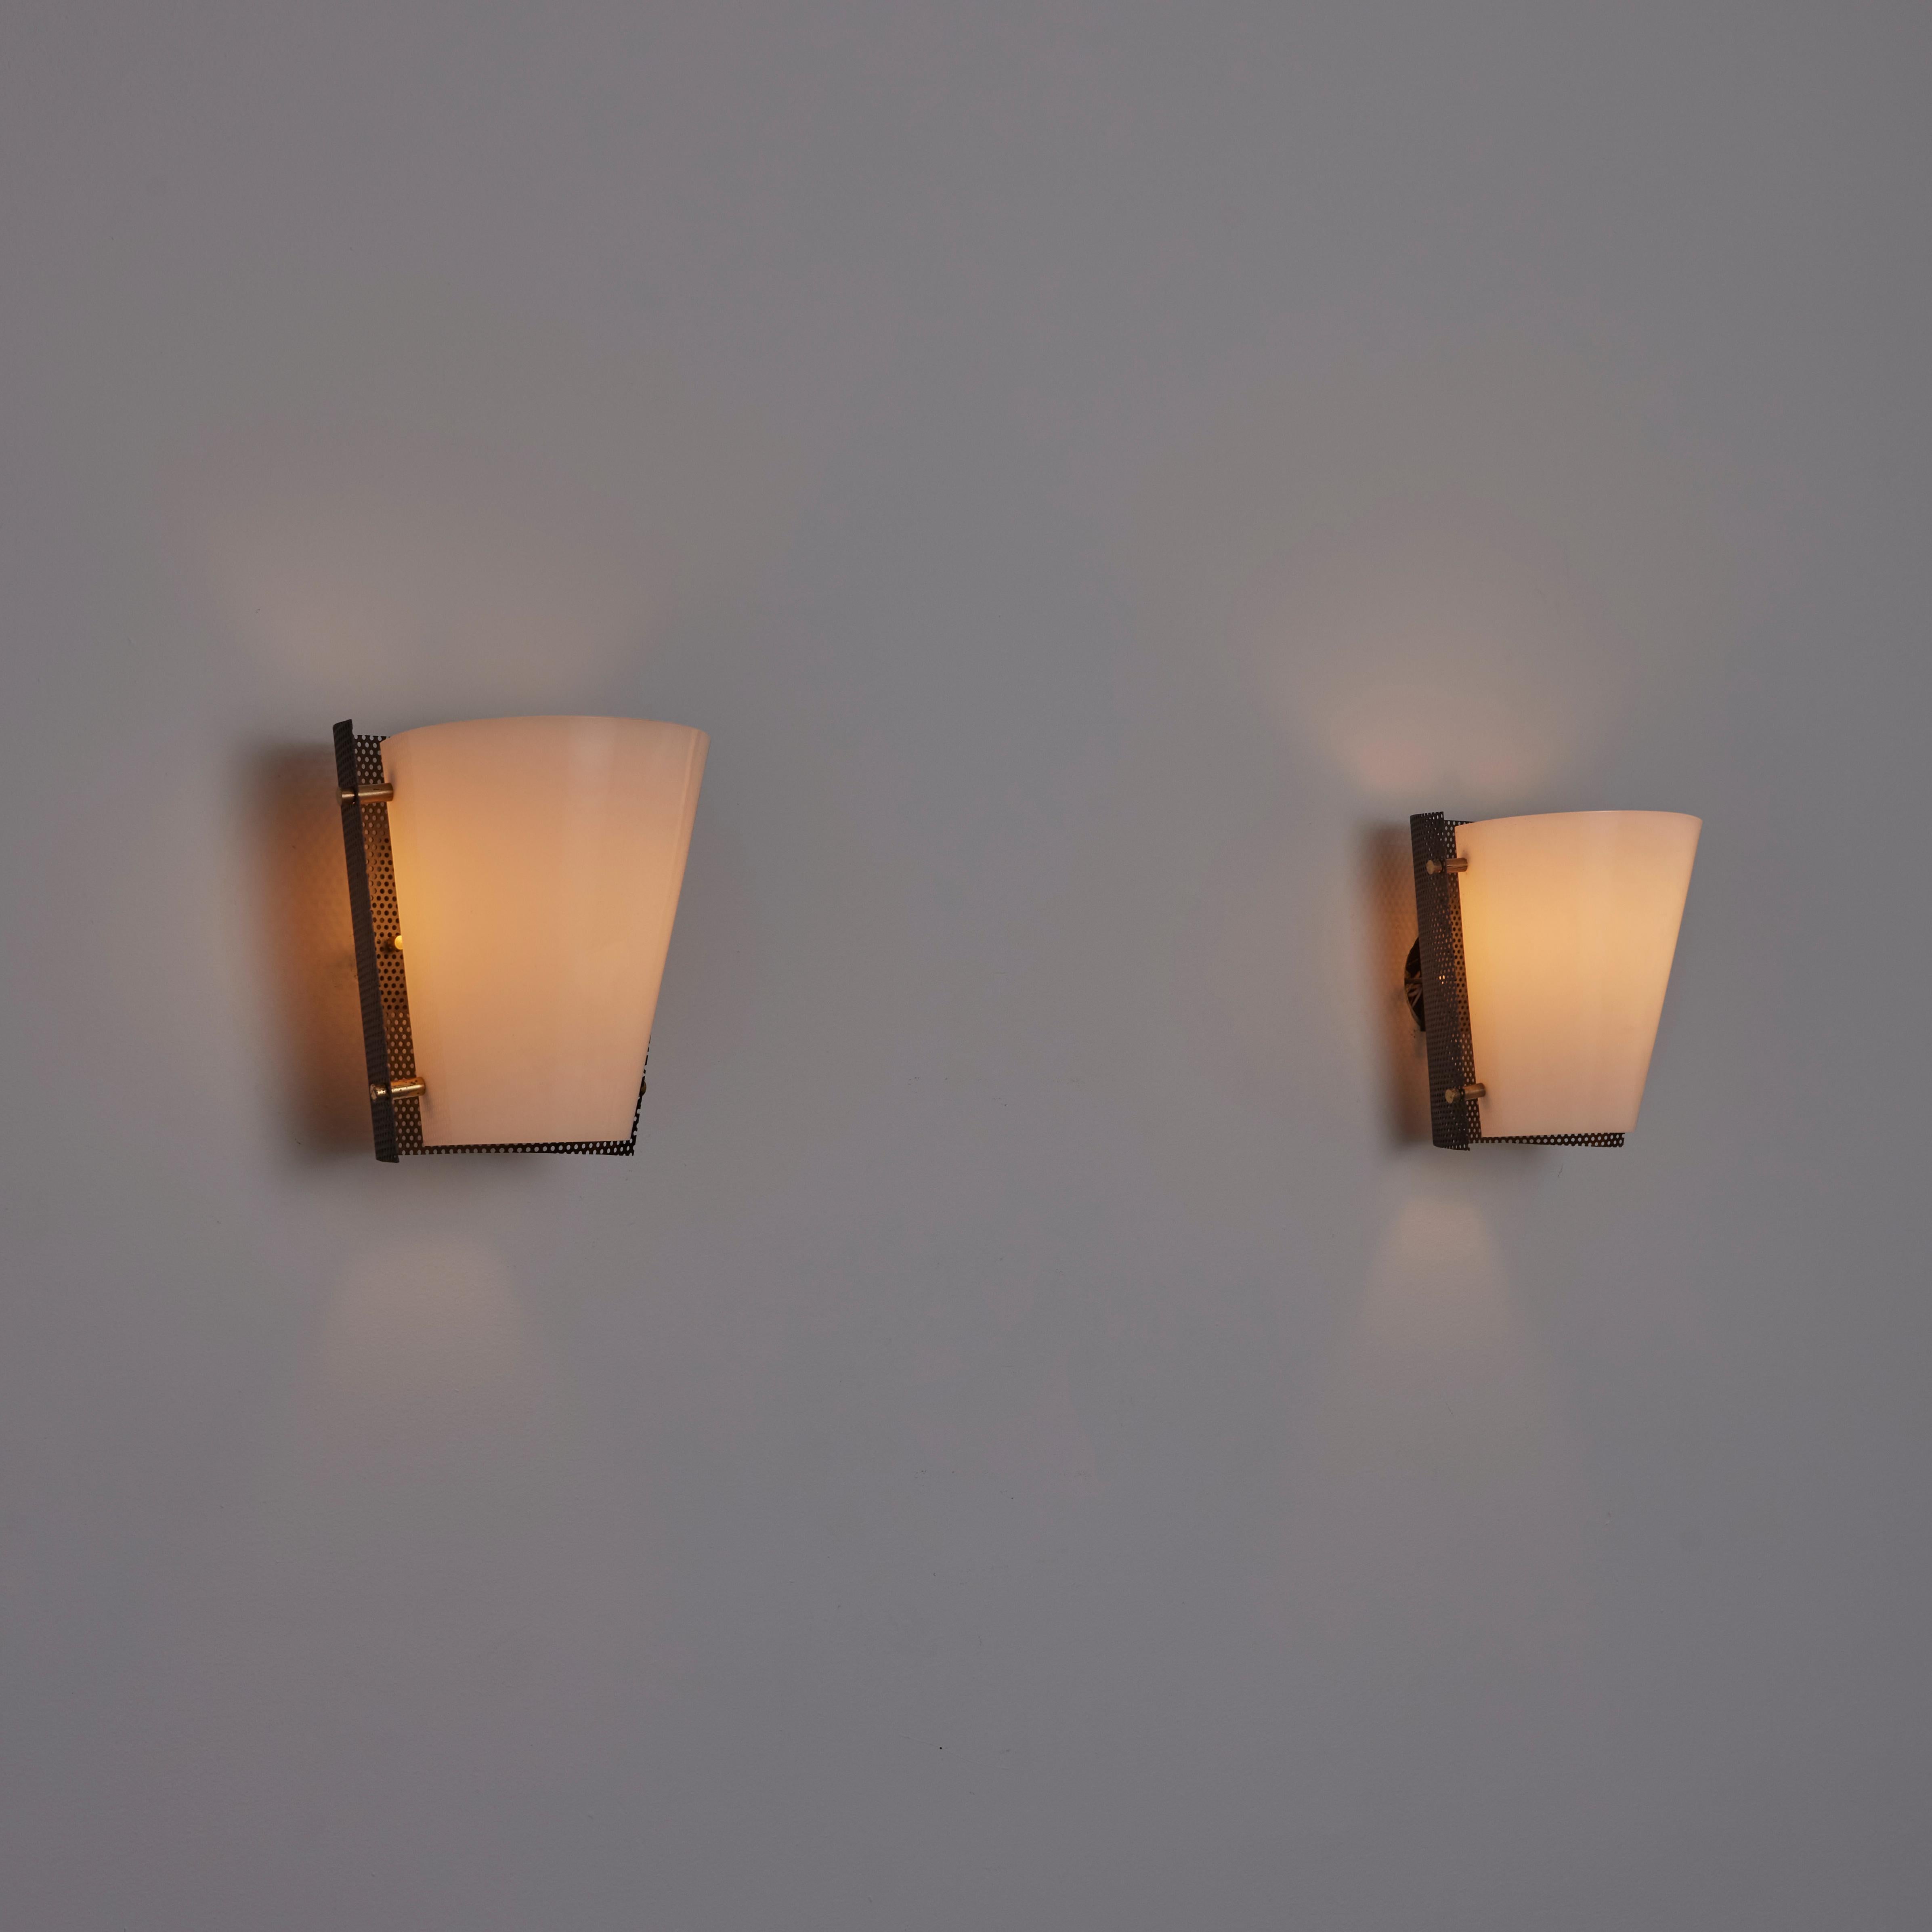 Pair of sconces by Stilnovo. Designed and manufactured in Italy, in 1955. Wall sconces with soft white acrylic diffusers, perforated black formed side paneling and brass hardware detailing. Each sconce holds one E27 bulb socket, adapted for the US.